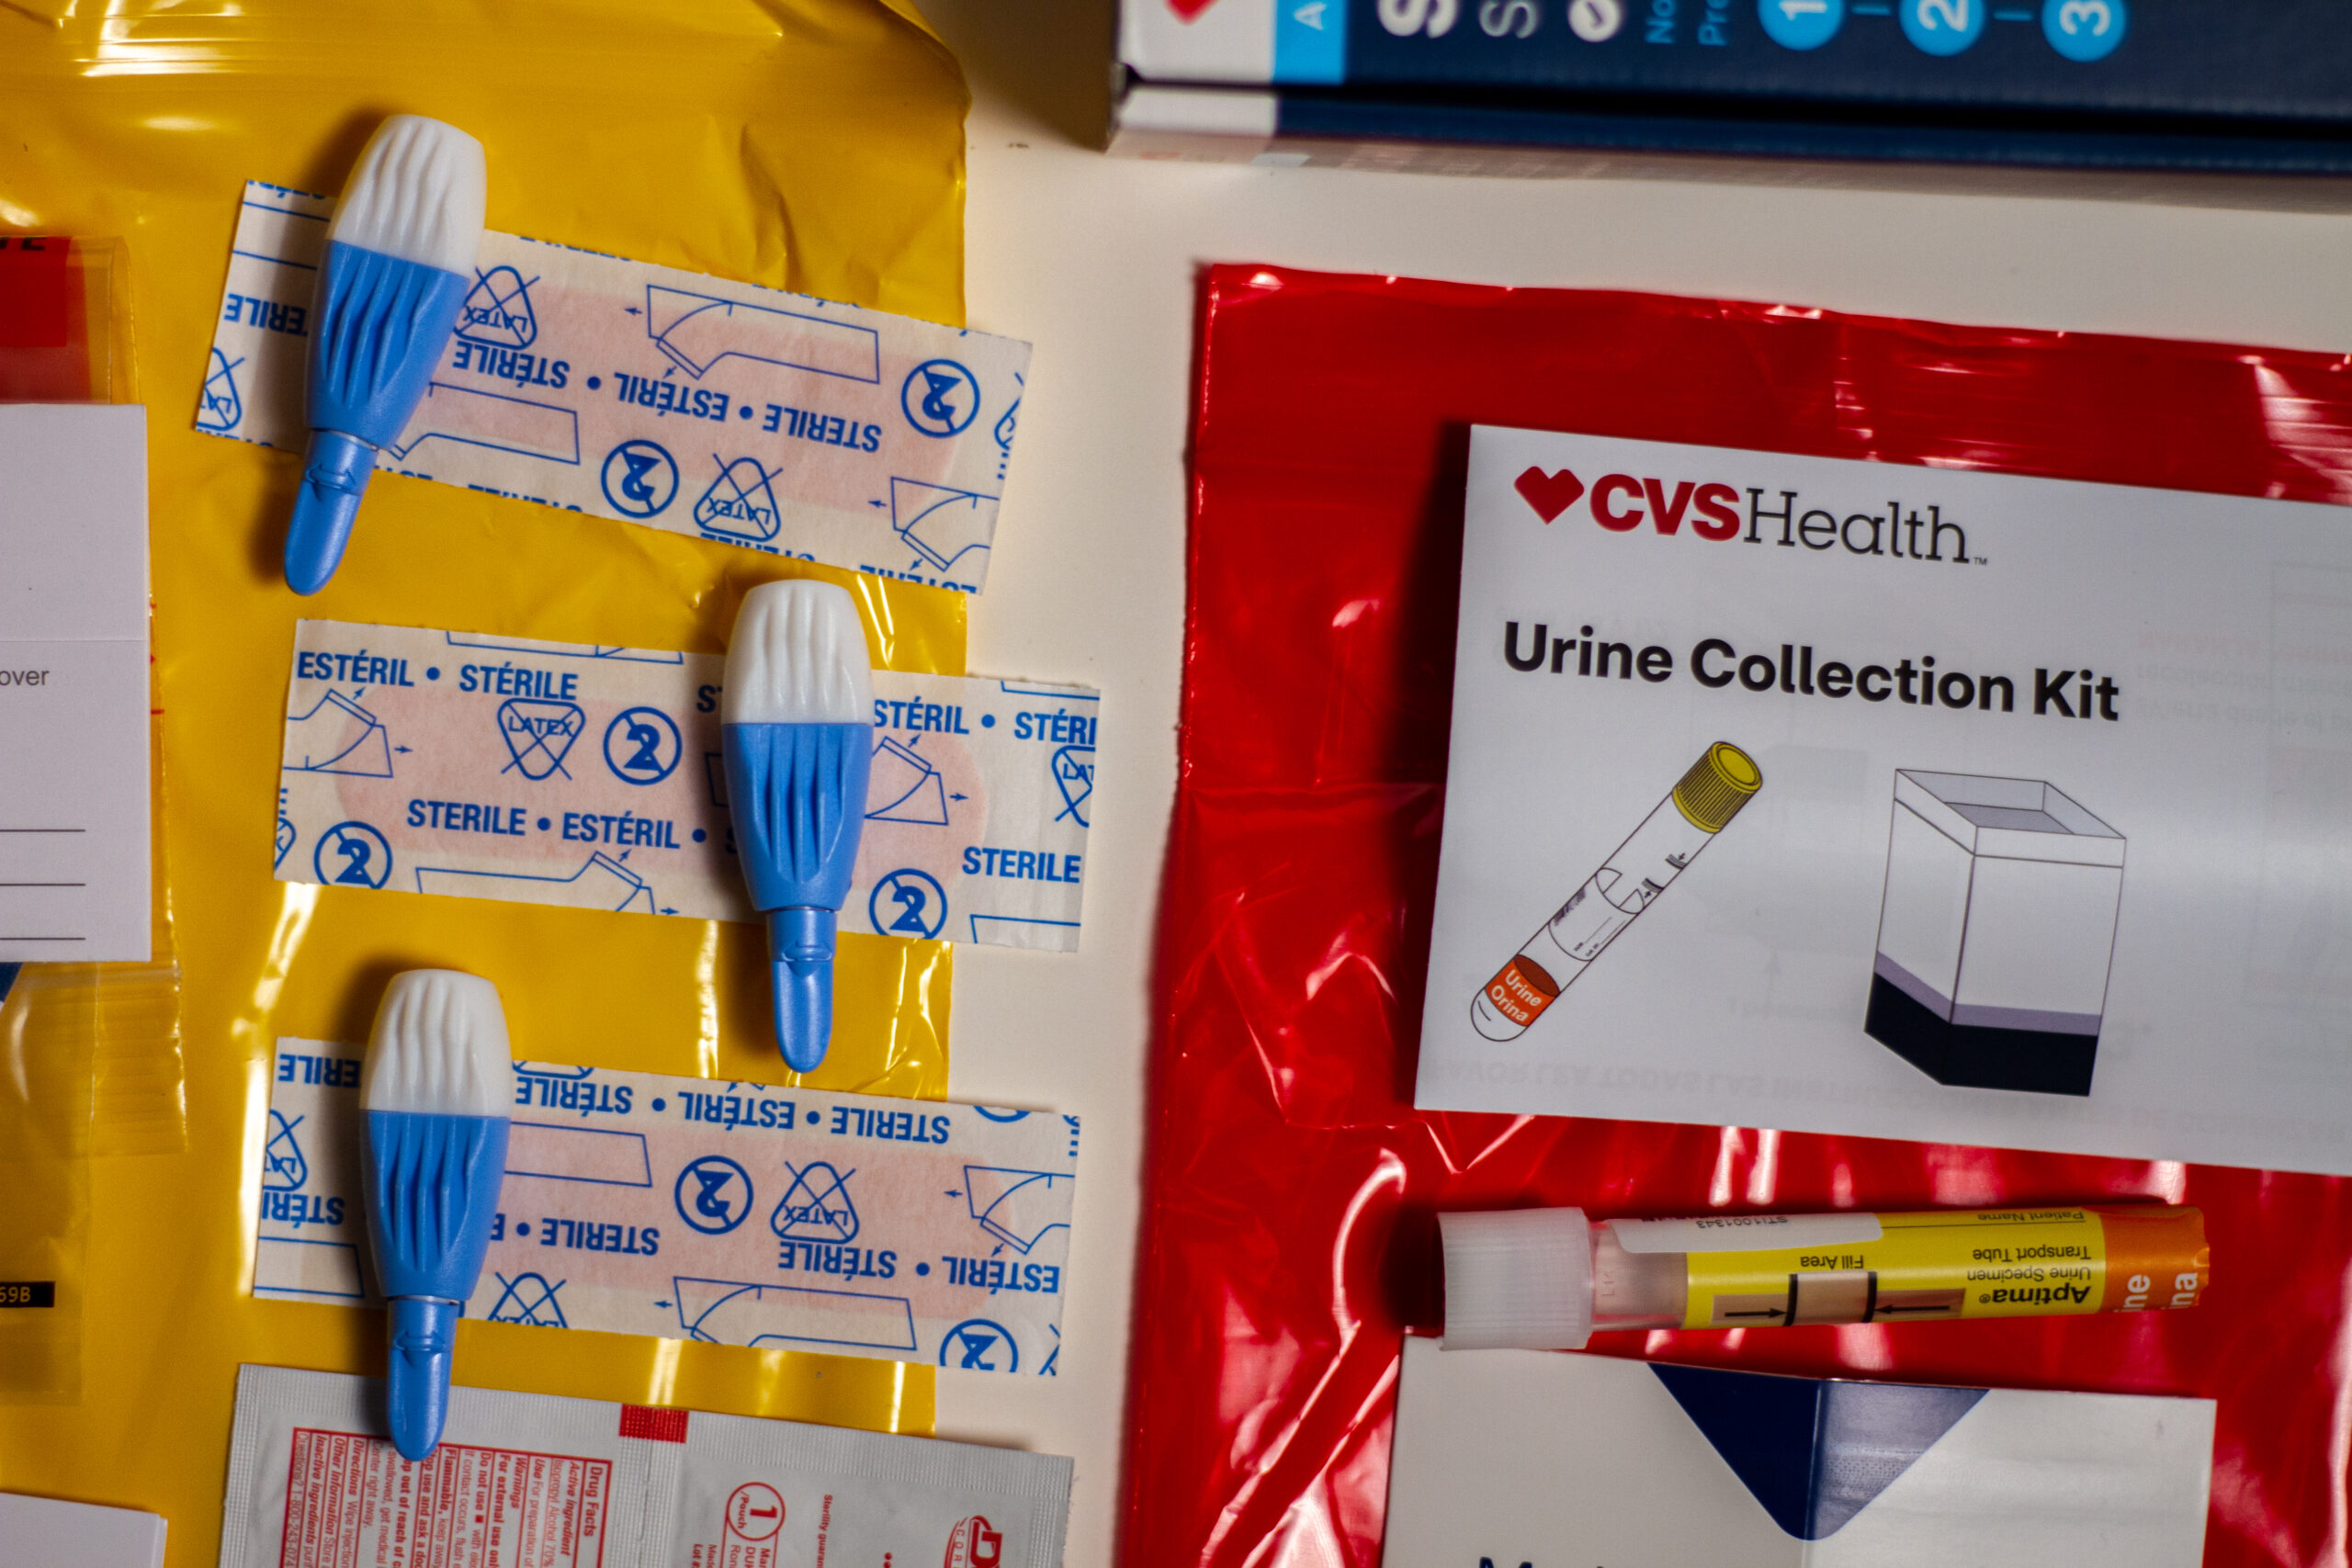 Public health advocates are urging the federal government to greenlight at-home STD test kits, saying that could vastly multiply the number of Americans getting tested. “If we’re really serious about tackling the STD crisis, we have to get more people diagnosed,” says Dr. Amesh Adalja at the Johns Hopkins University Center for Health Security.